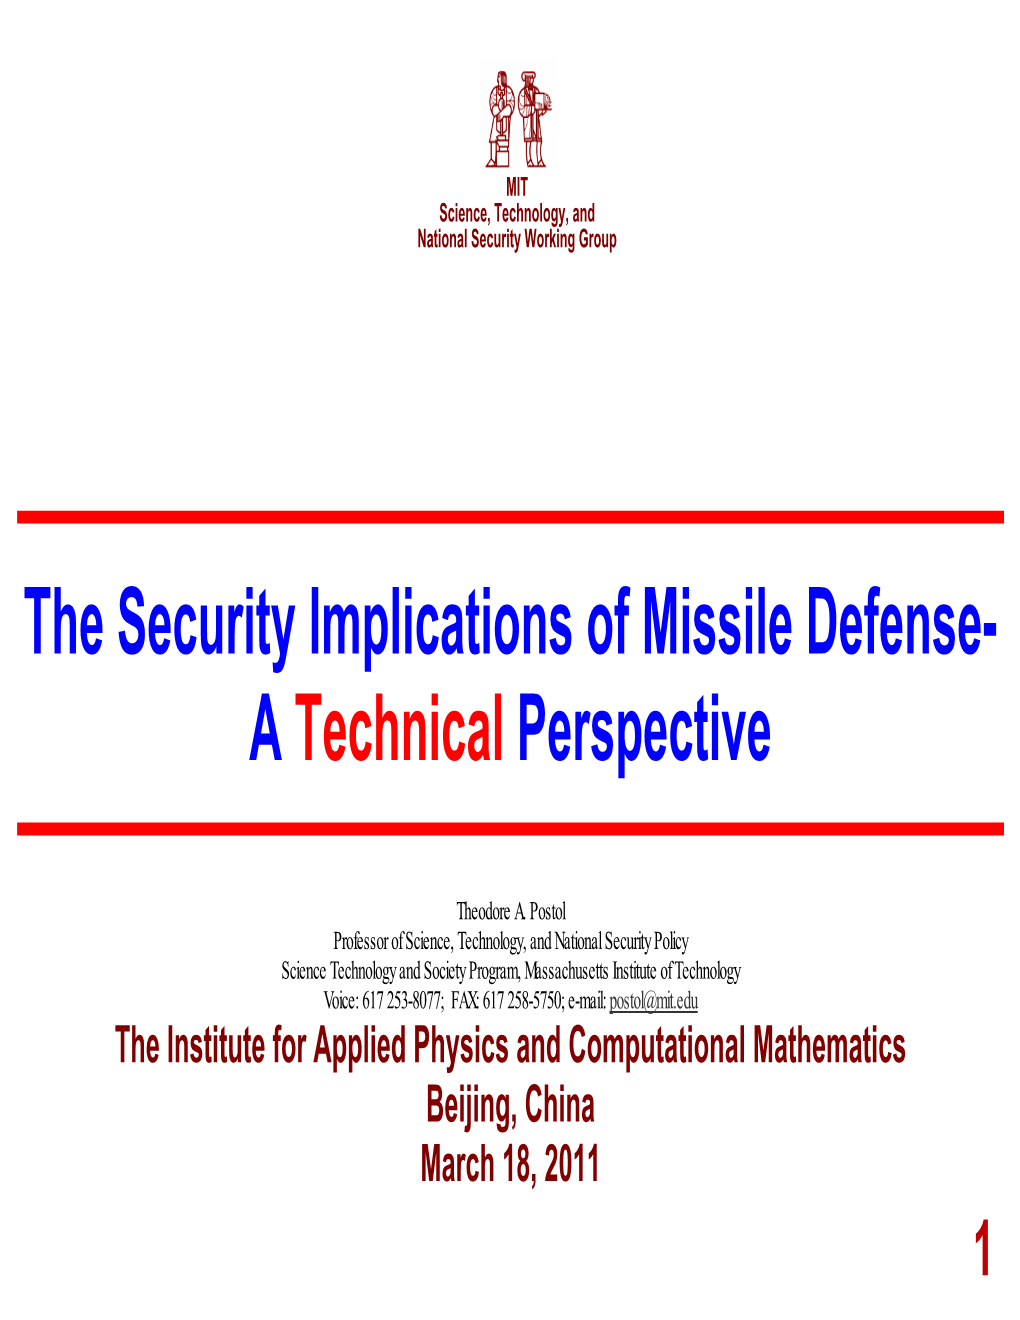 The Security Implications of Missile Defense- a Technical Perspective